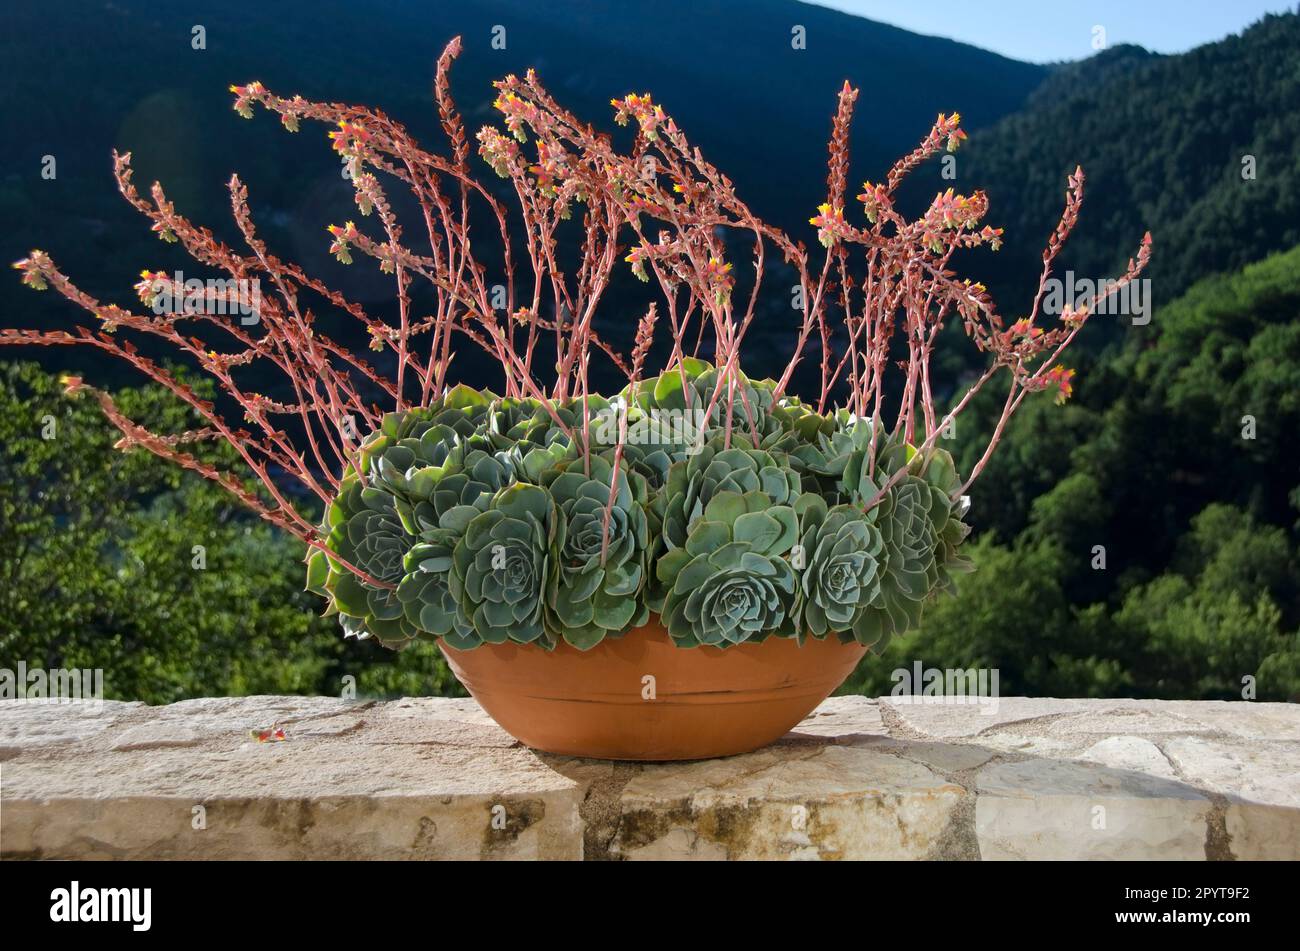 Summer flowers in the pot against mountain as background Stock Photo